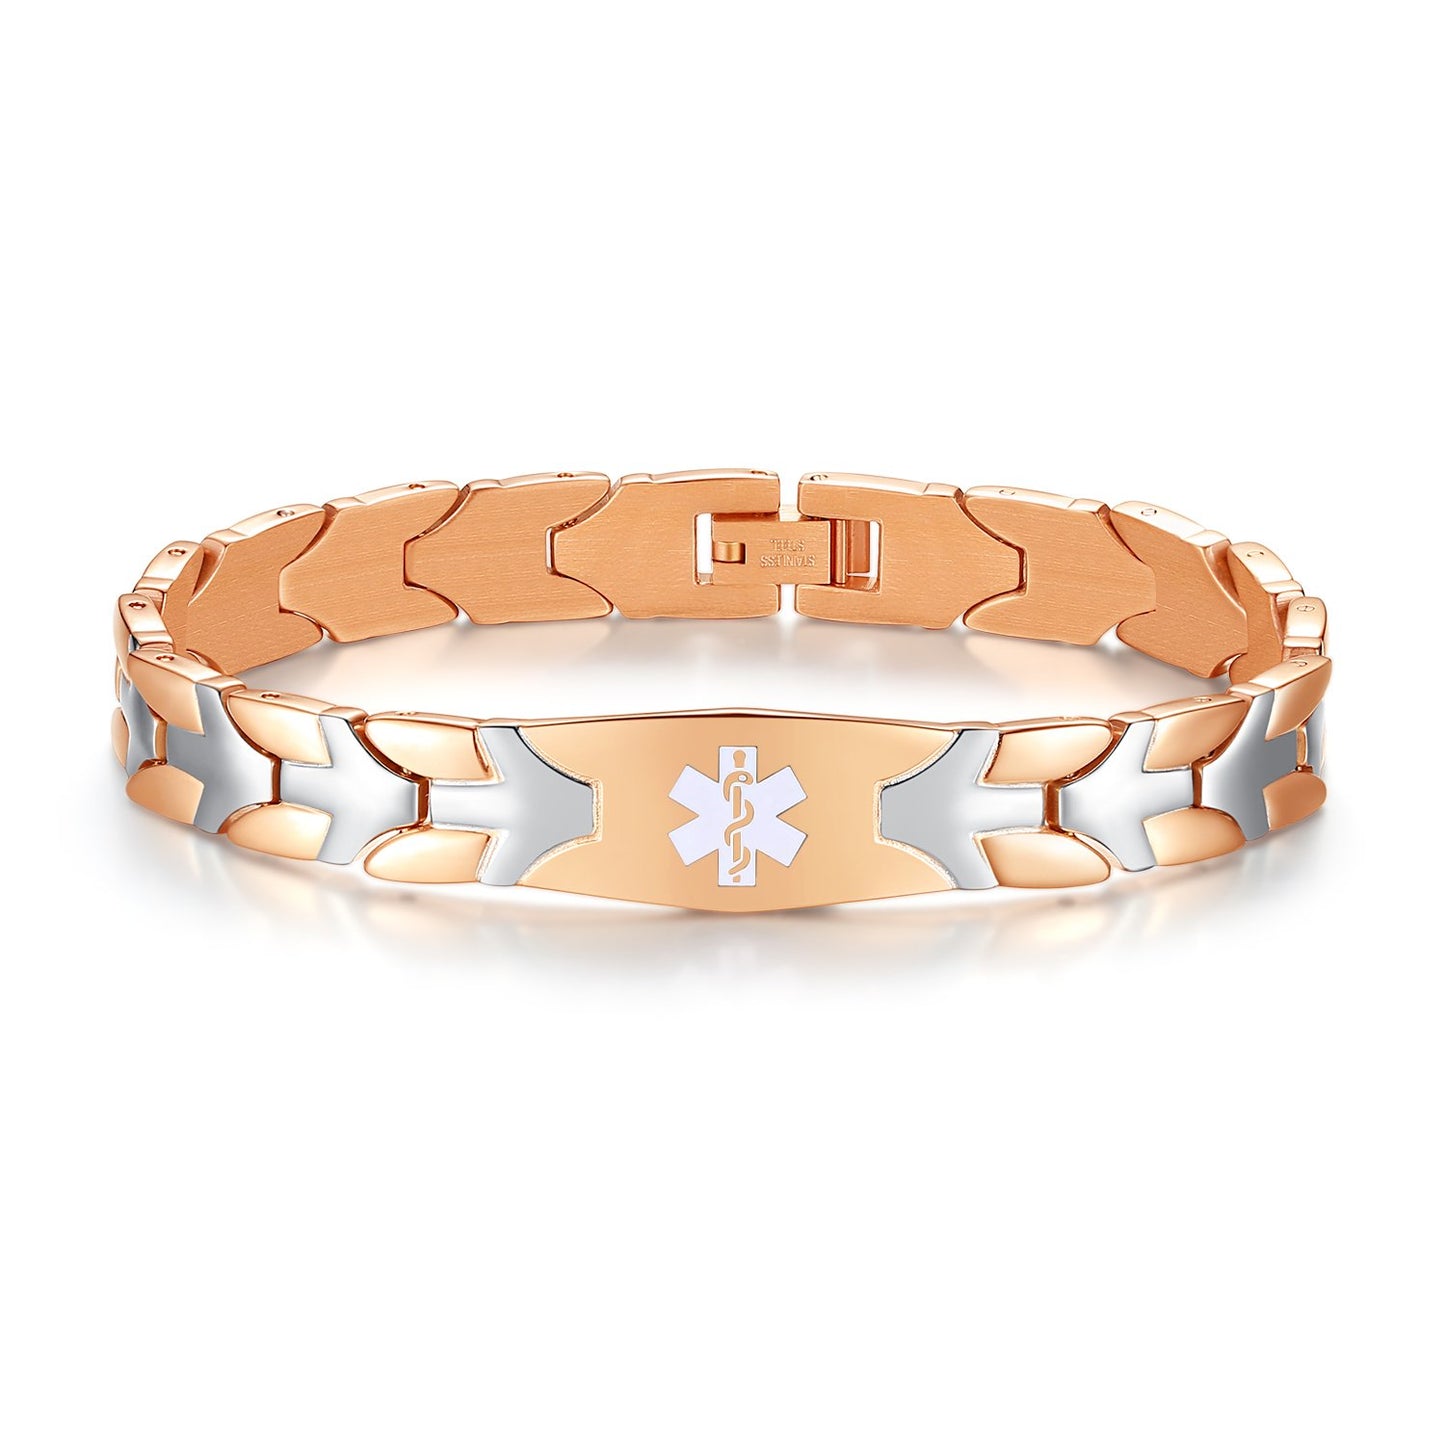 Fashion Rose Gold Flying fish Stainless steel Medical Alert id Bracelets with Free Engraving